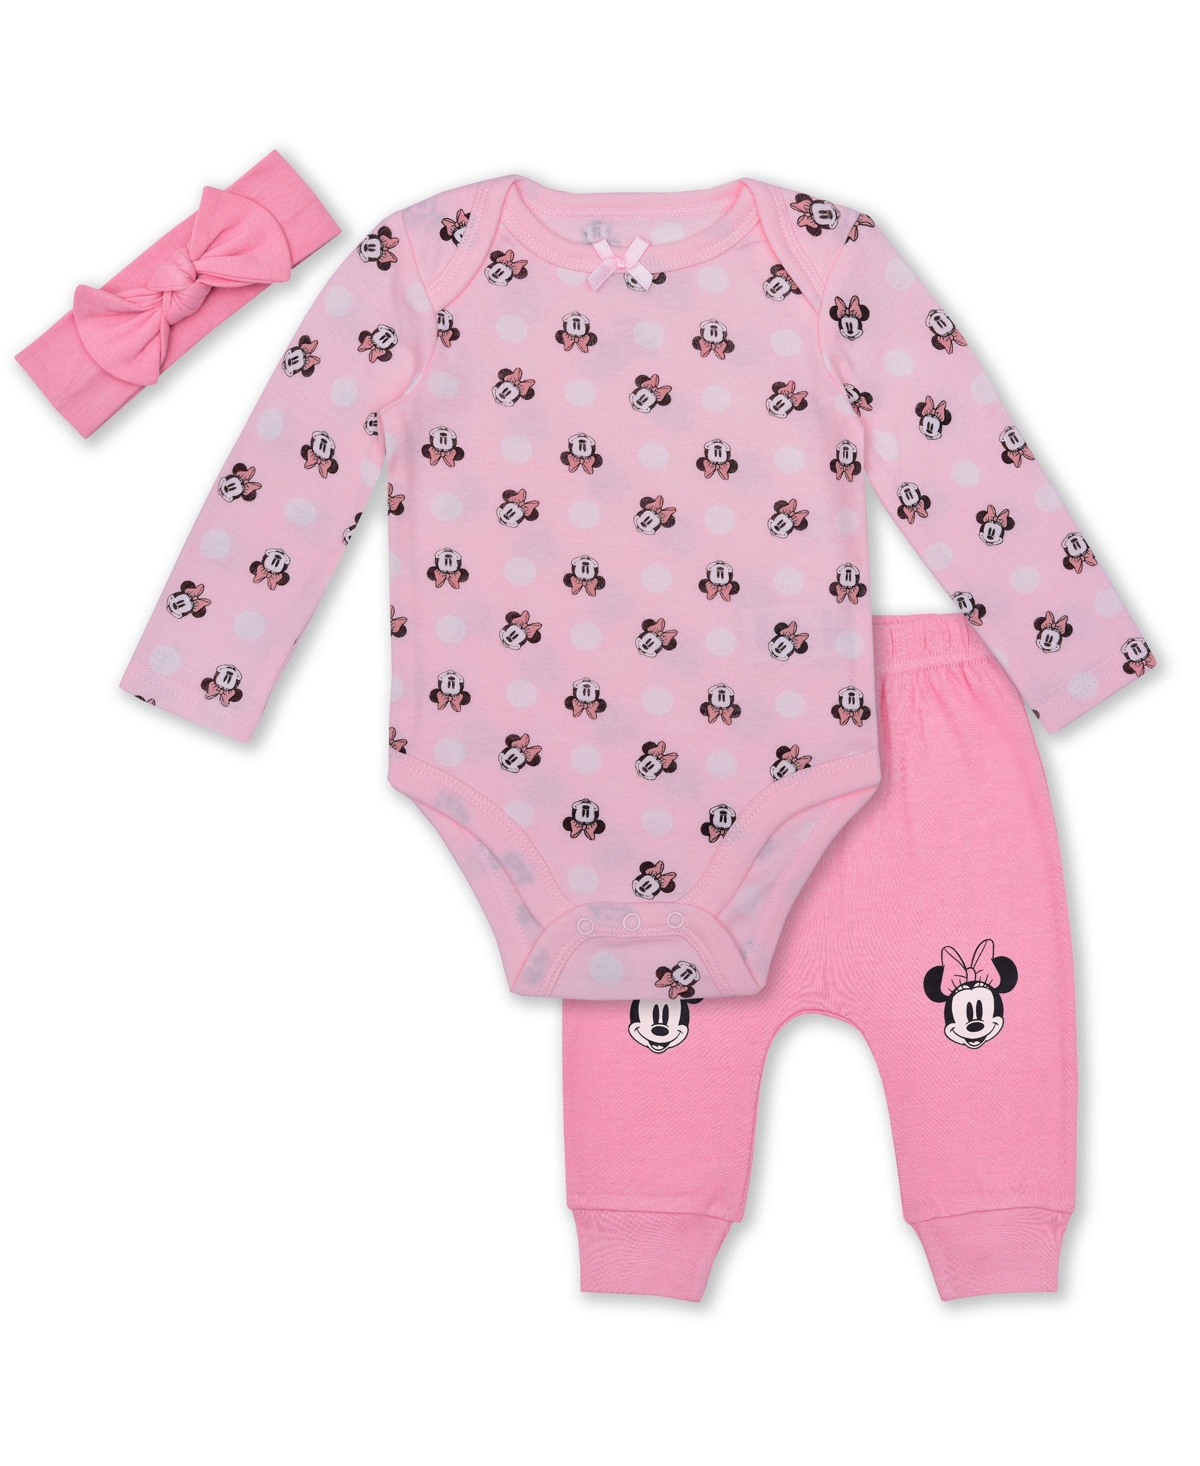 Disney Baby Girls Minnie Mouse Top, Pant, And Headband Set In Rose Pink